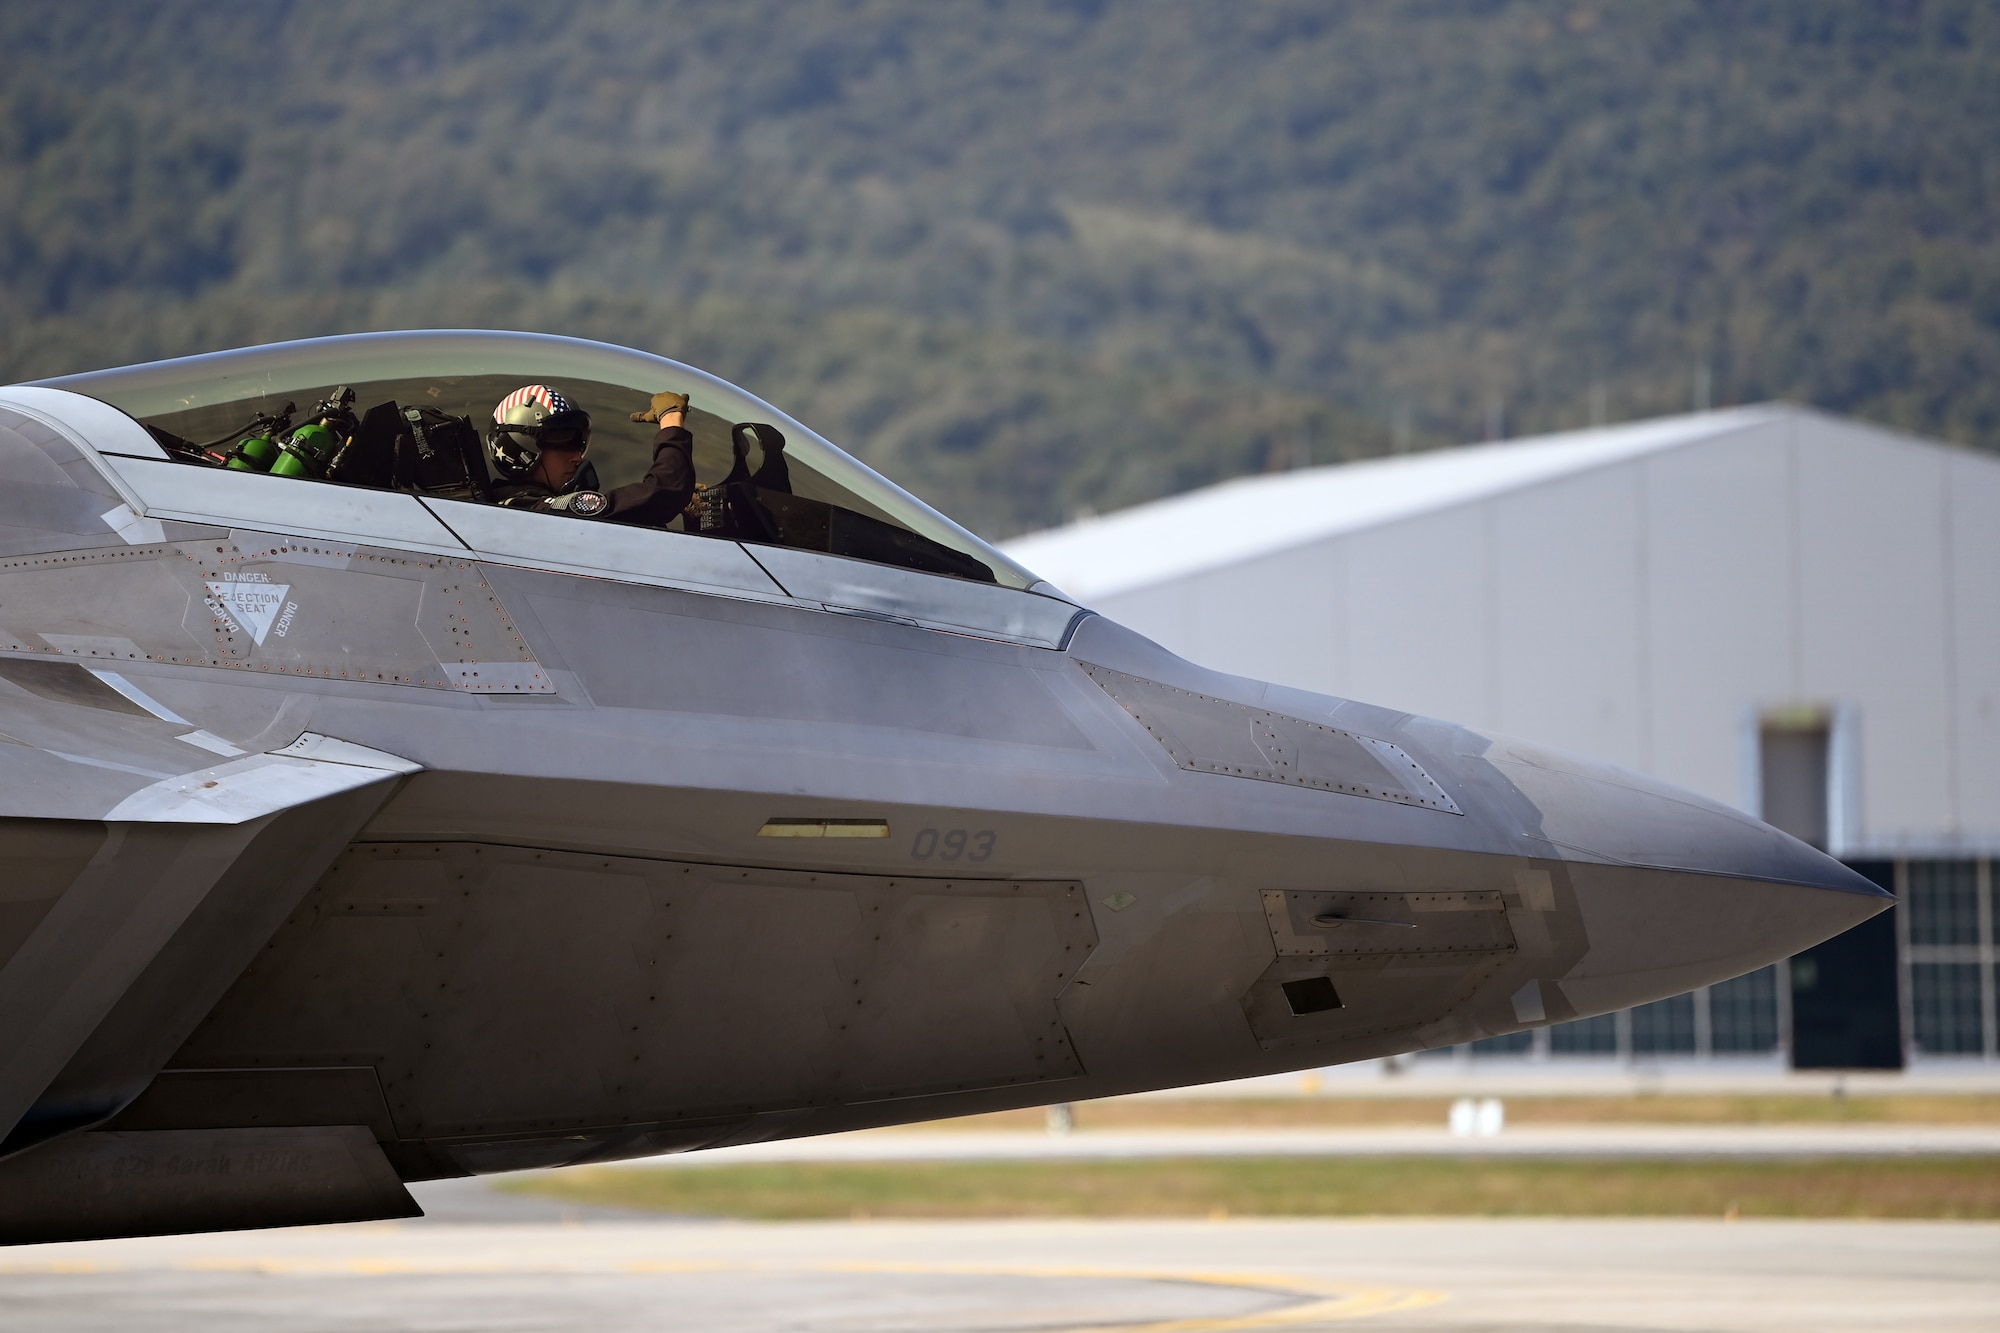 U.S. Air Force Capt. Samuel Larson, F-22 Demonstration Team commander, Joint Base Langley-Eustis, Va., prepares to take off during the 2023 Seoul International Aerospace and Defense Exhibition media day at Seoul Air Base, Republic of Korea, Oct. 16, 2023.